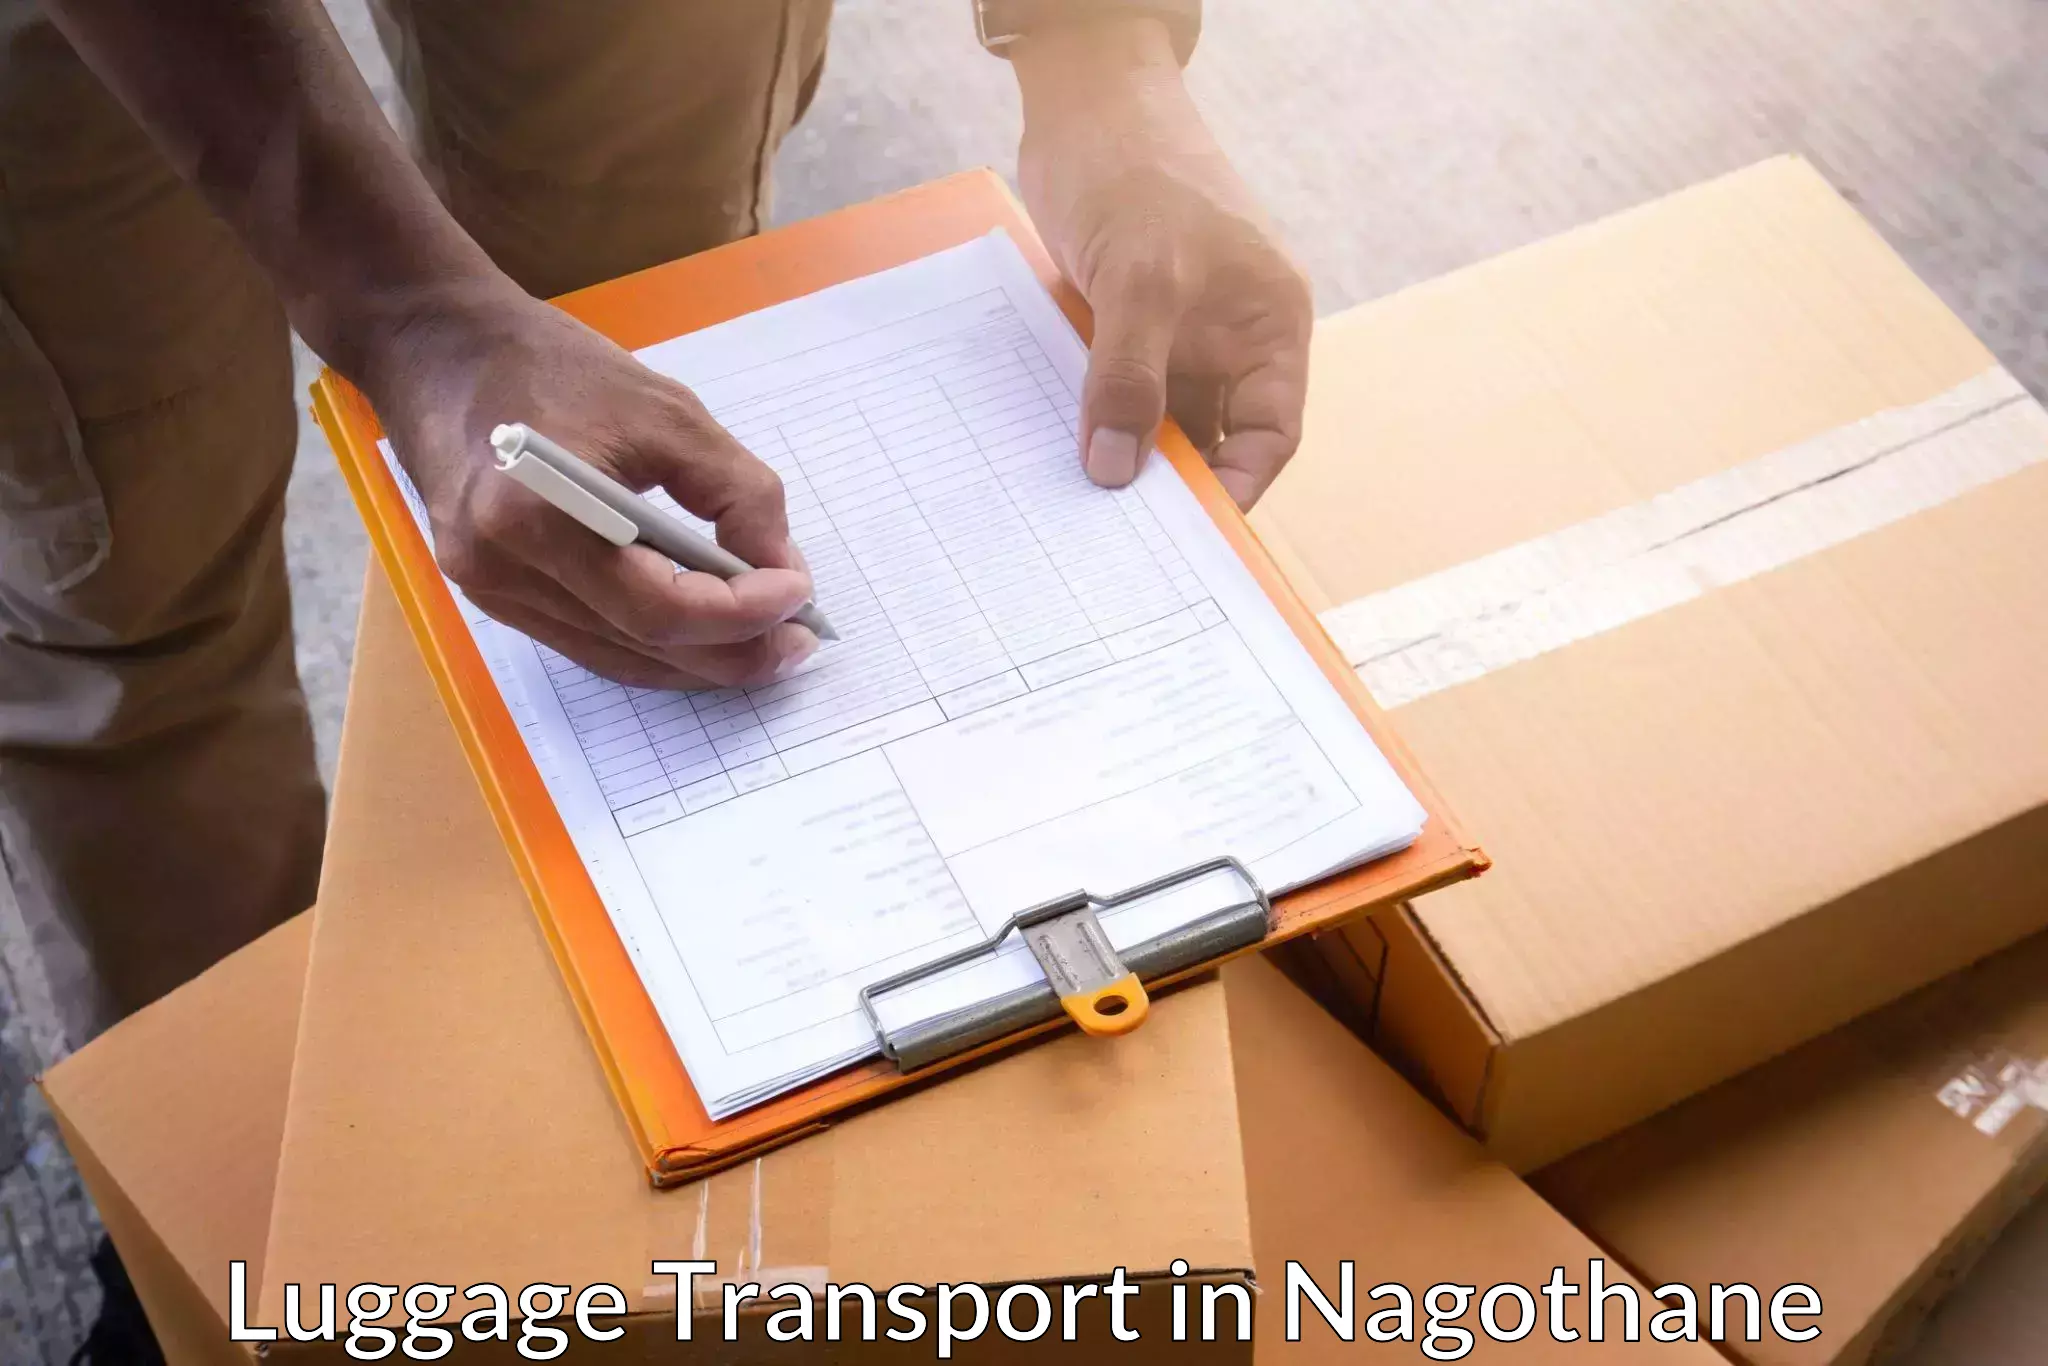 Luggage shipping trends in Nagothane